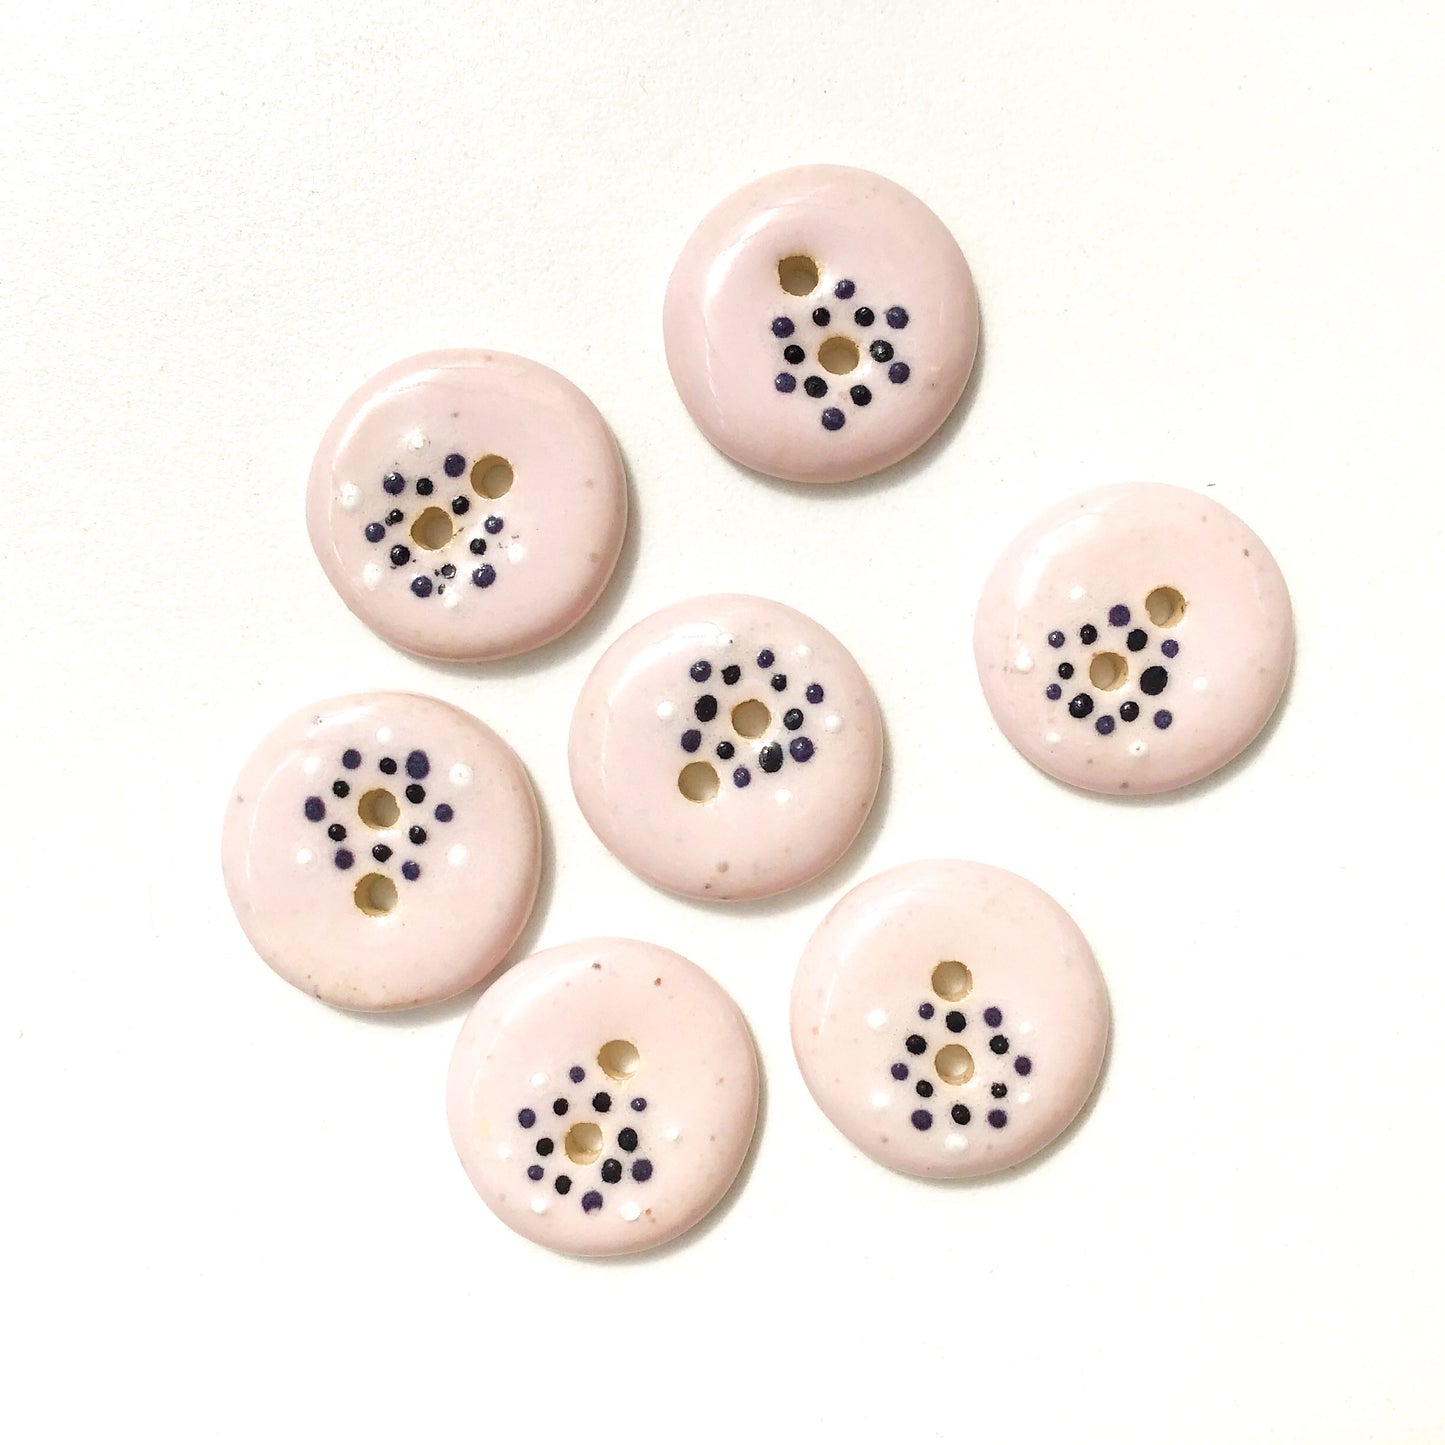 Soft Pink "Spark" Ceramic Buttons - Pink Clay Buttons - 3/4" - 7 Pack